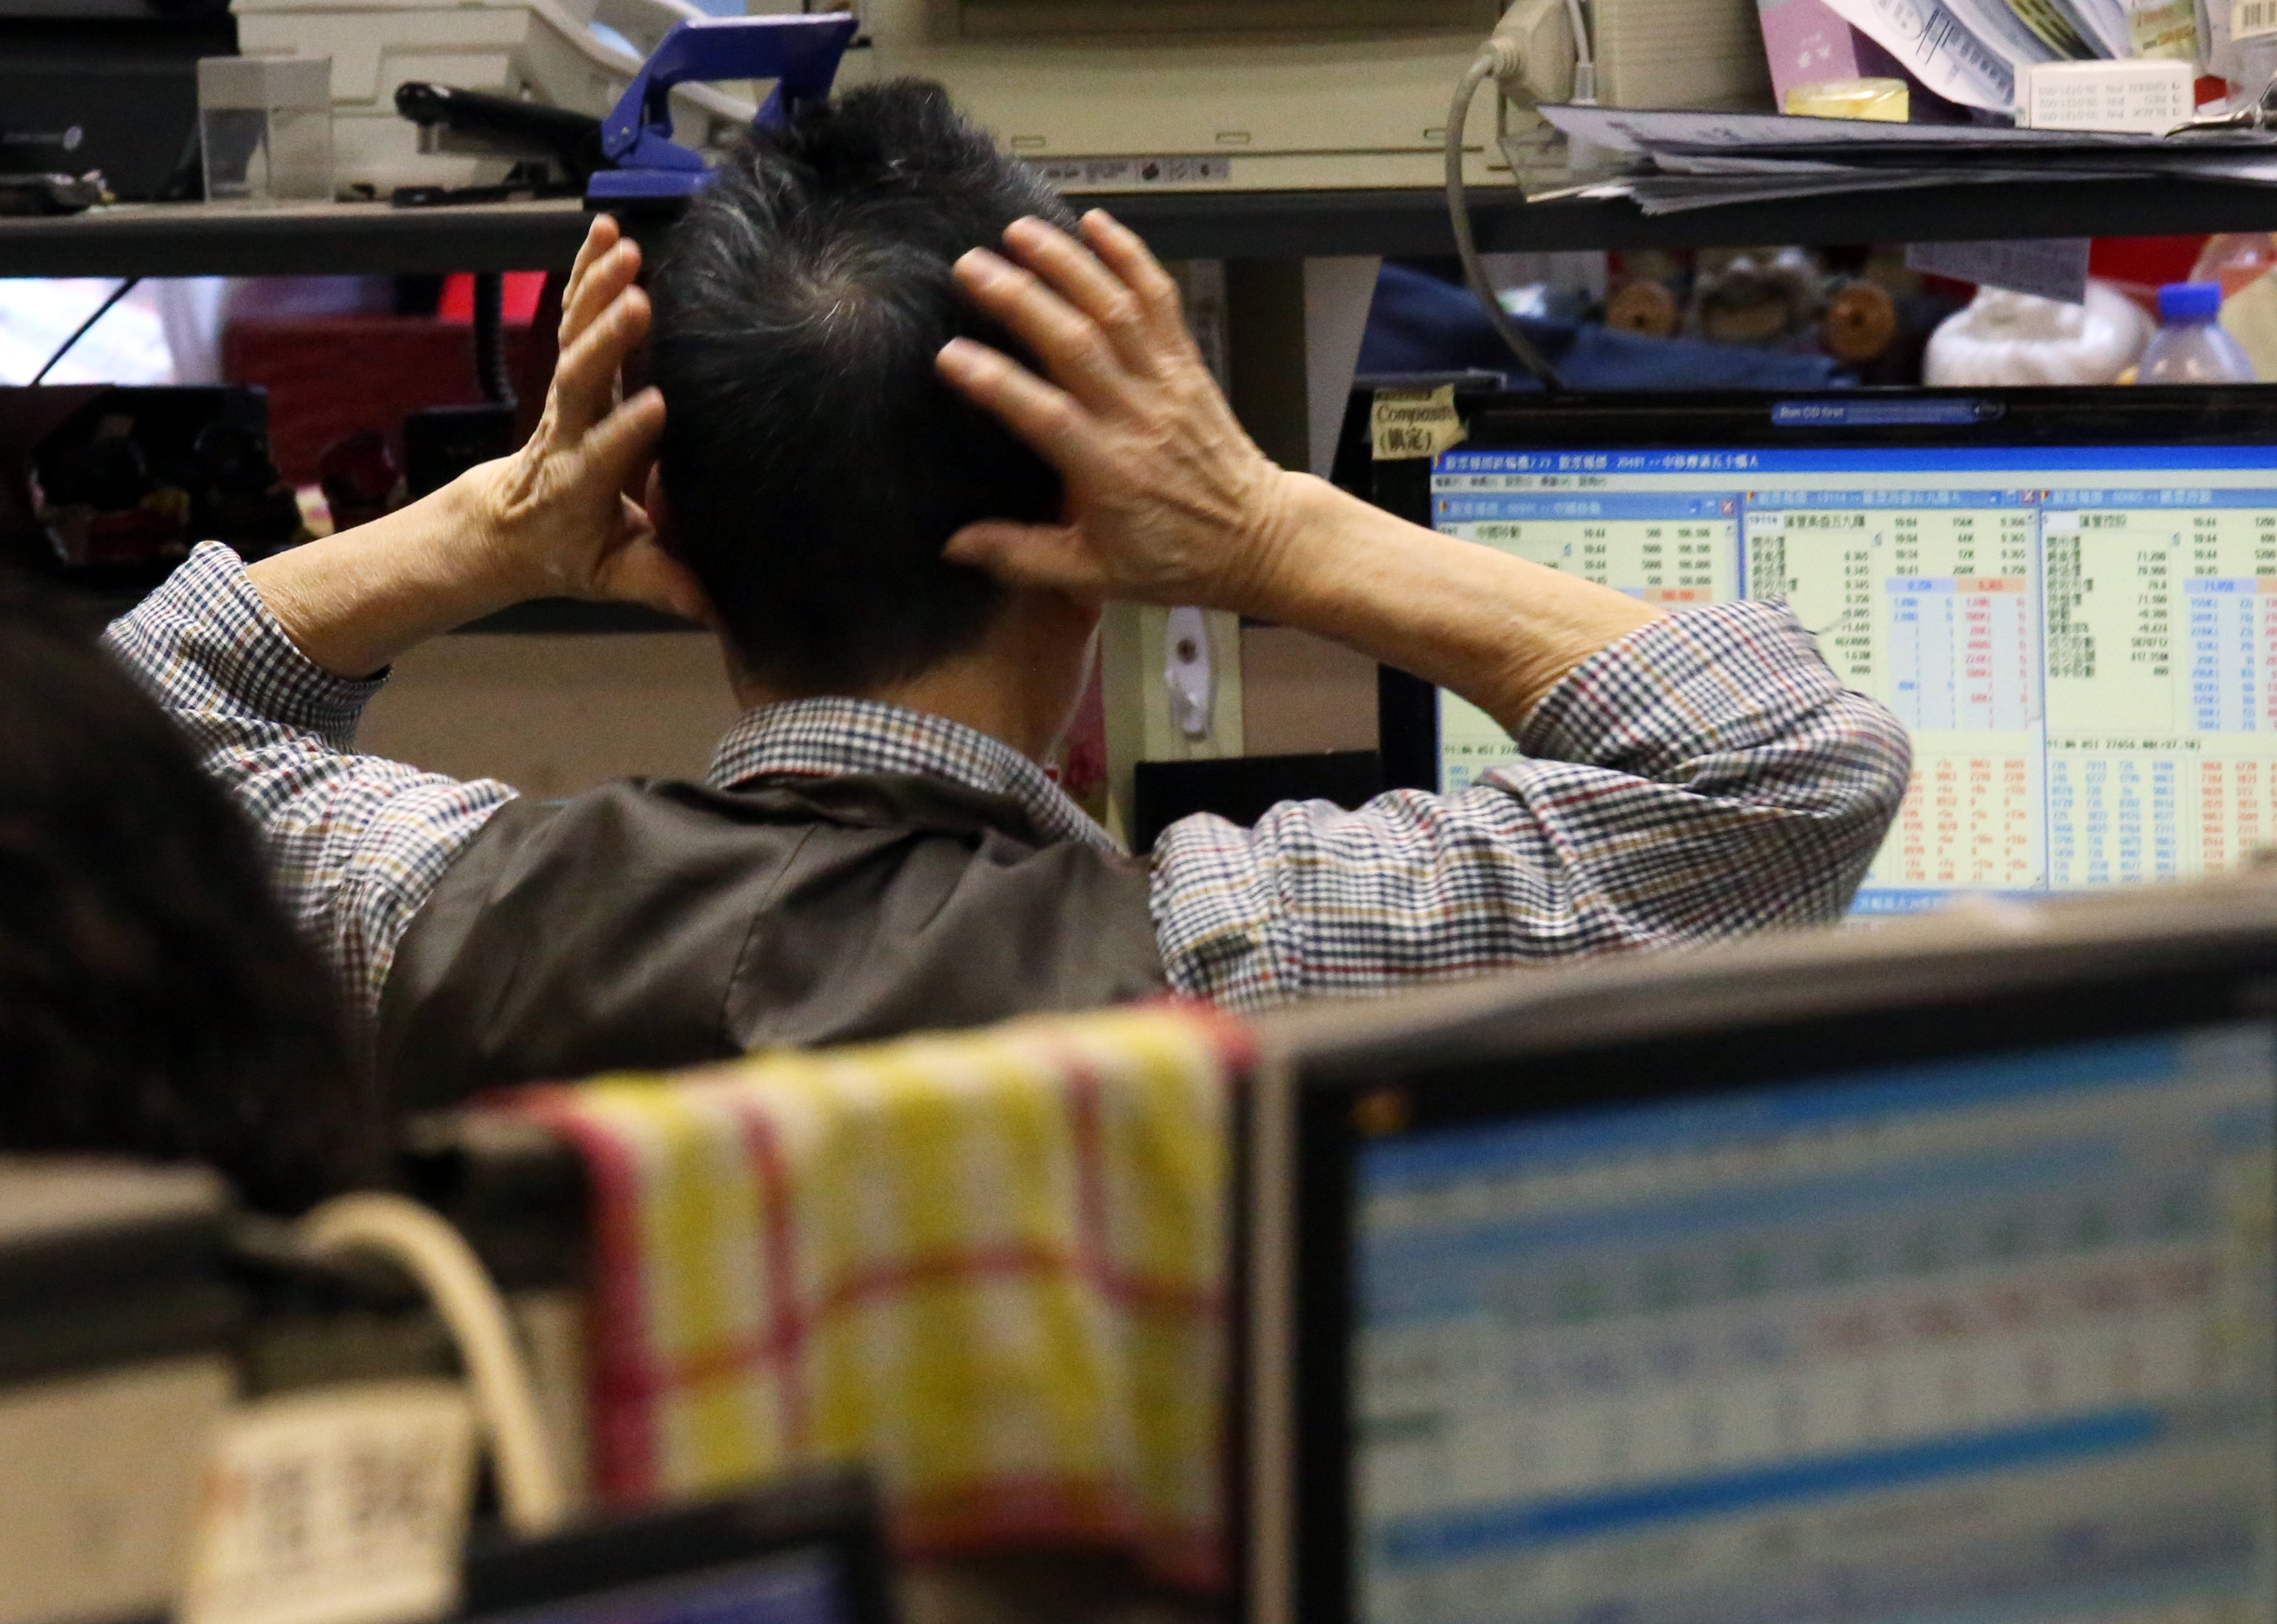 A trader in Hong Kong grabs his head in consternation. The exchange operator, Hong Kong Exchanges and Clearing, is putting in a system to fight the sharp volatility caused by high-frequency traders. Photo: Nora Tam